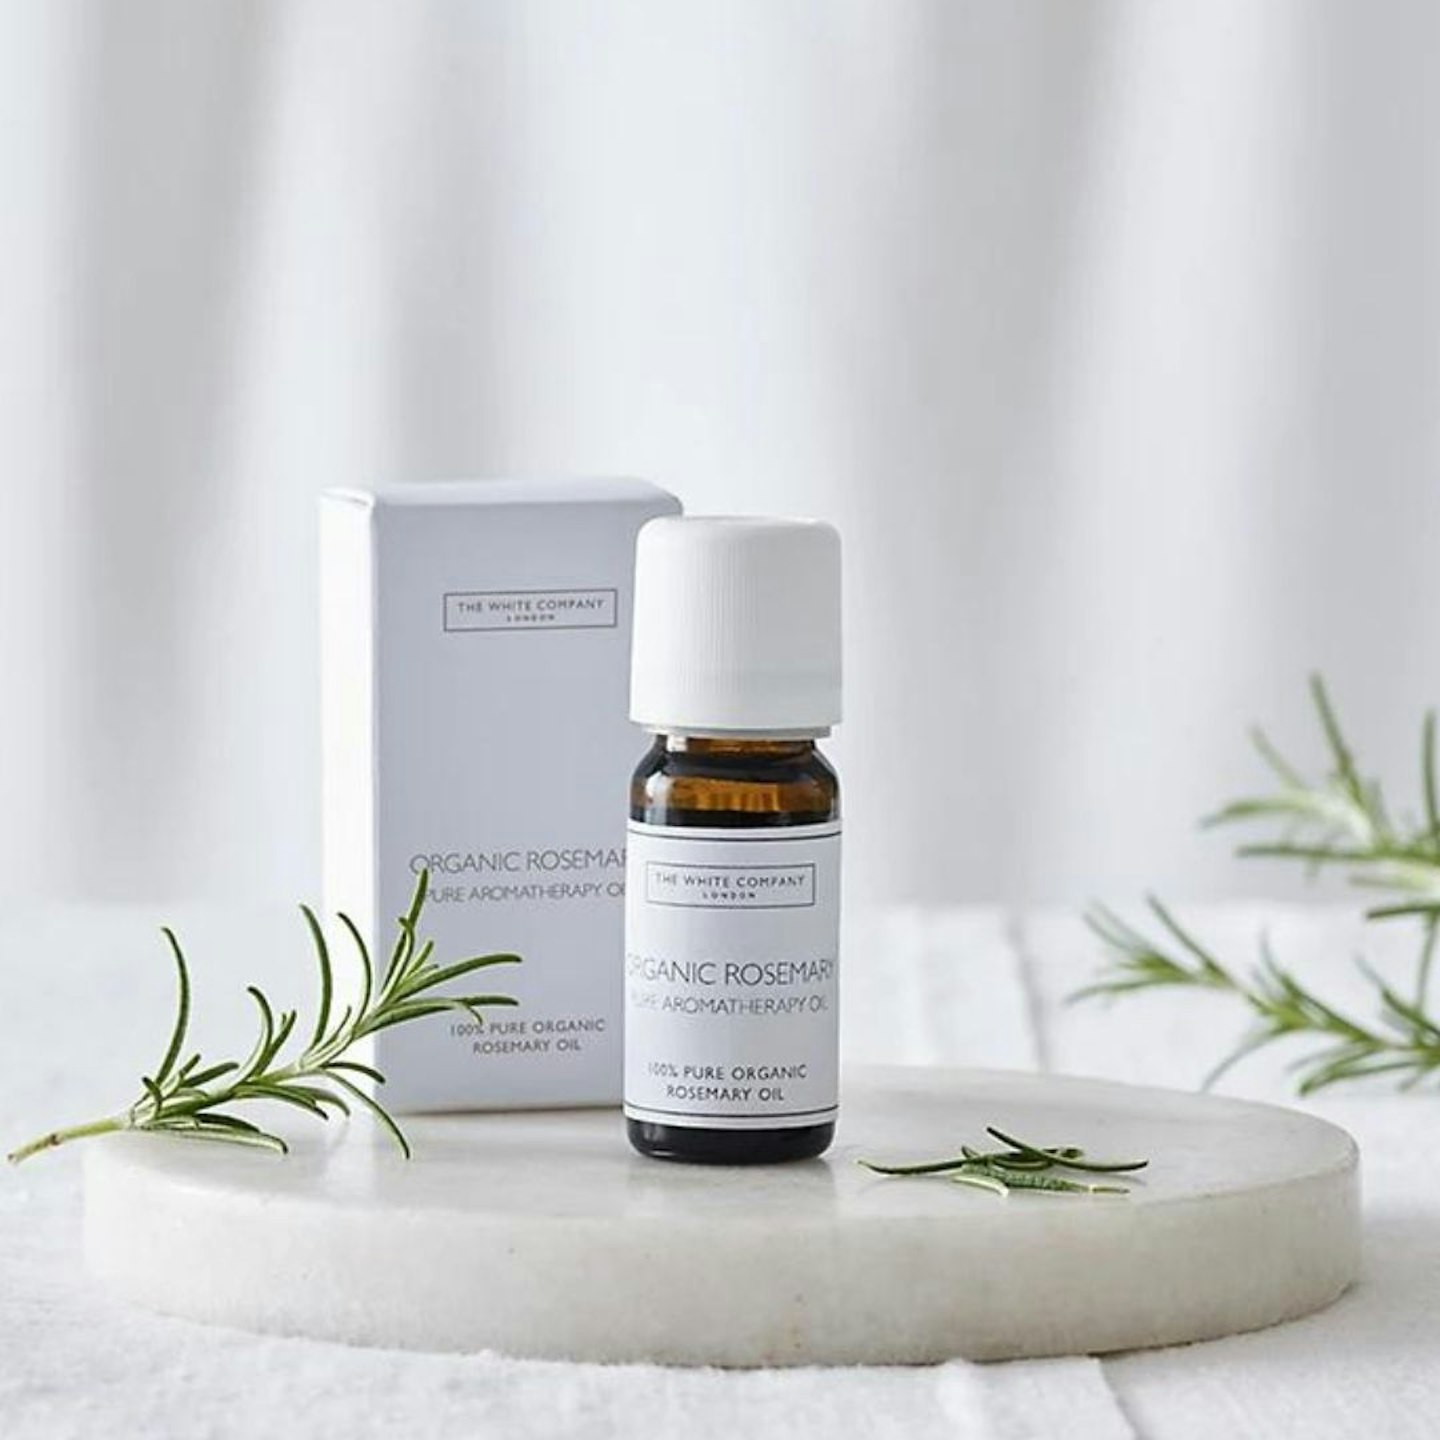 The White Company sale : Organic Rosemary Pure Aromatherapy Oil